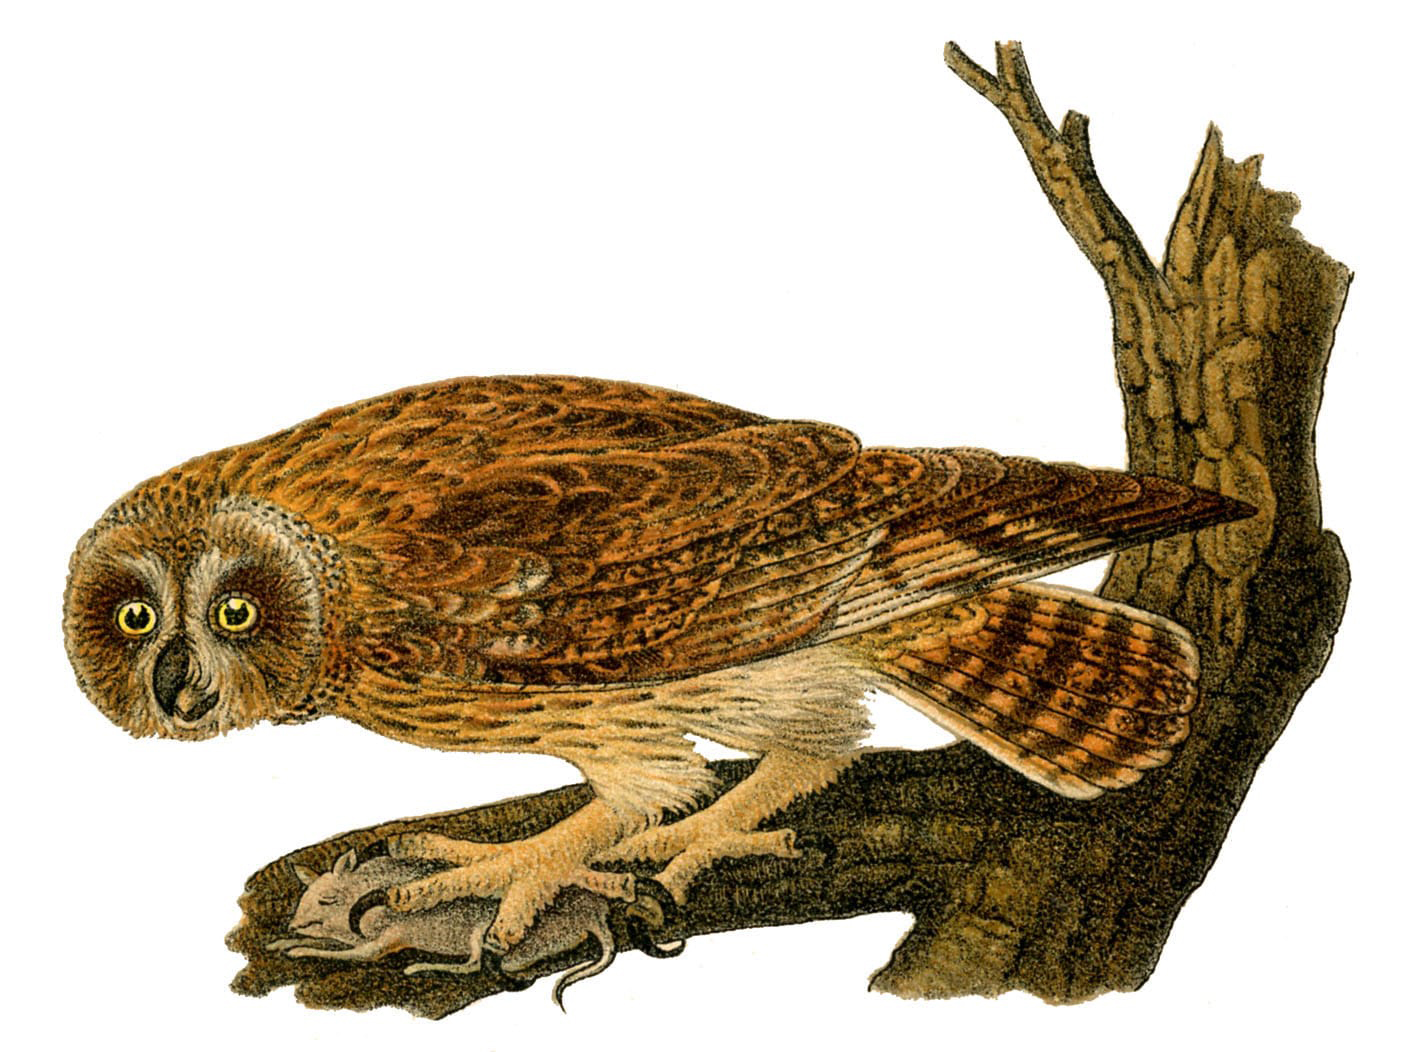 Owl with Prey Image